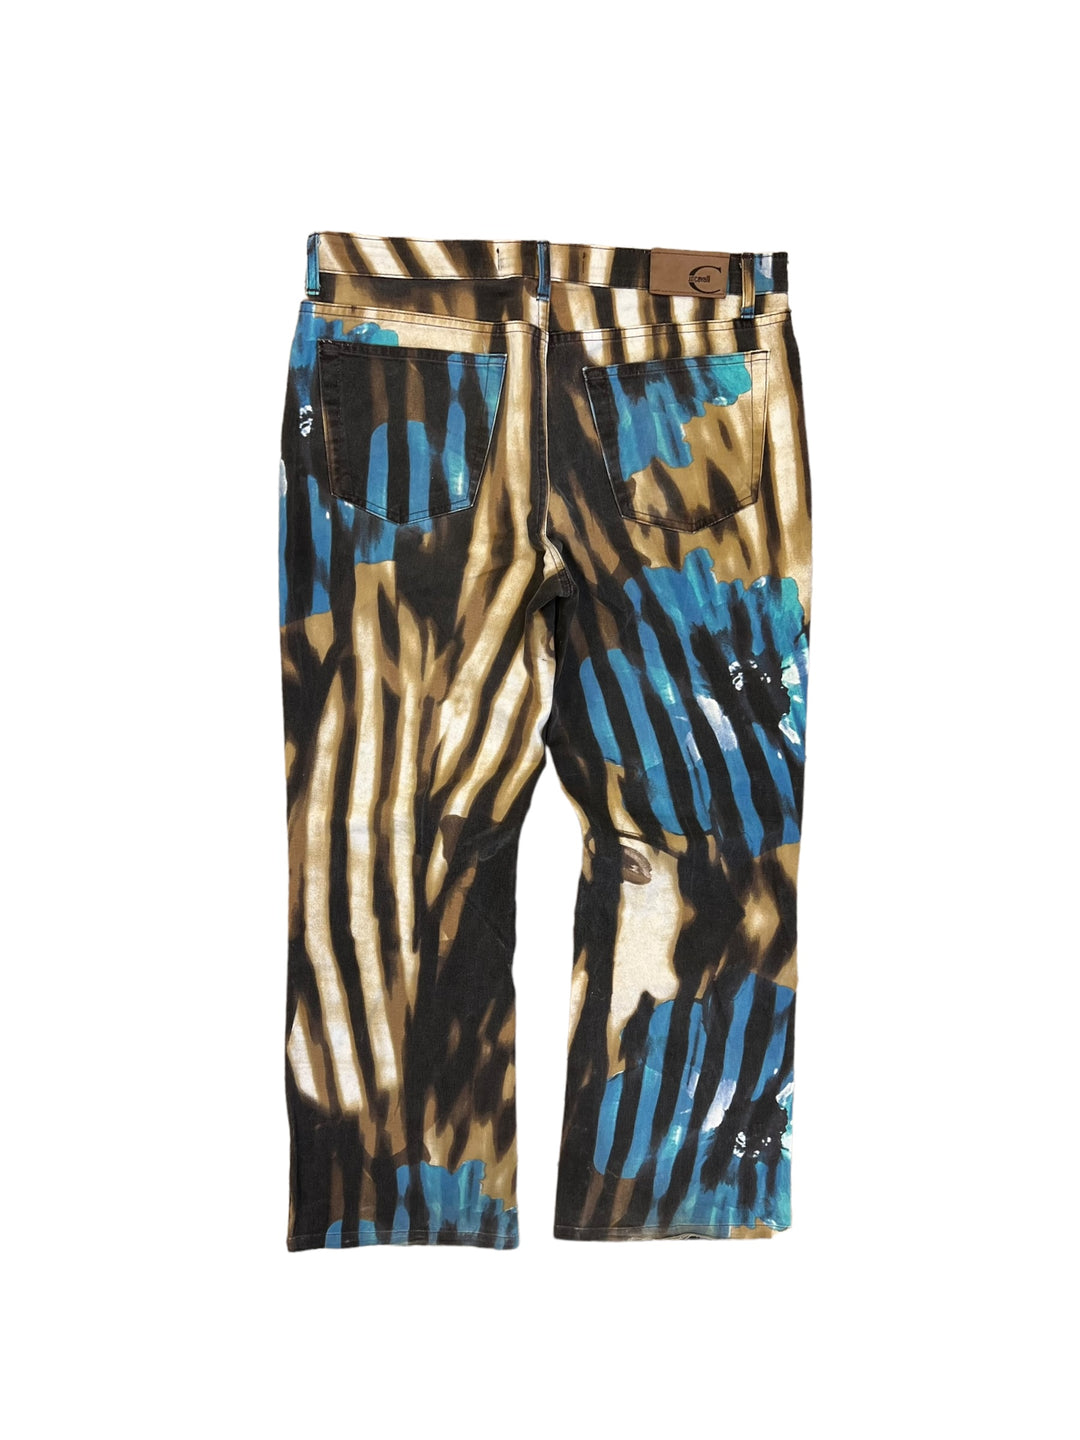 Just Cavalli SS 2002 low waist all over print jeans Women's large(42) *short down * check the dimensions